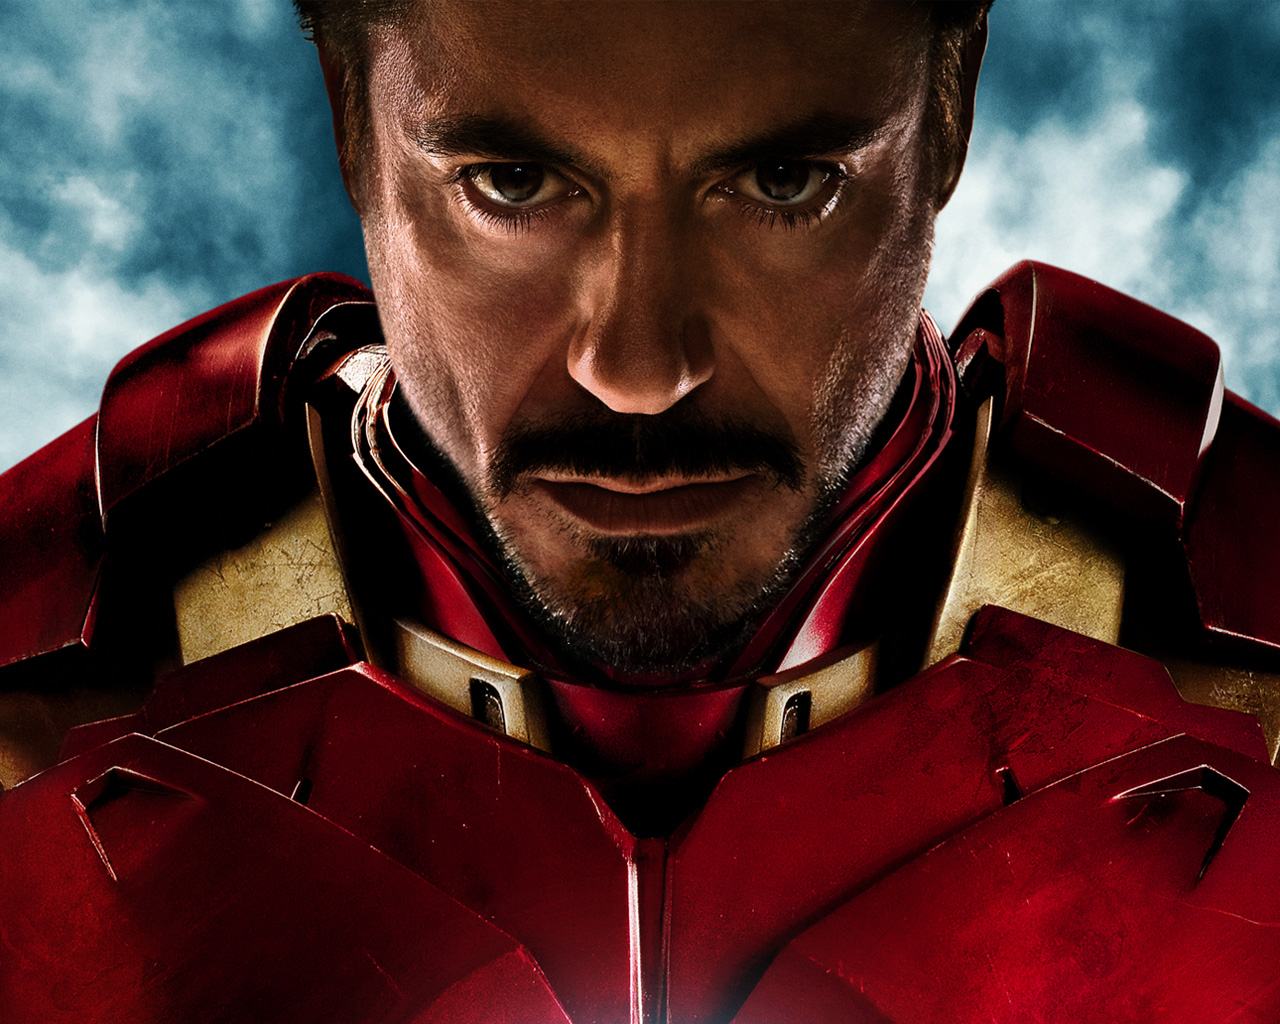 Robert downey jr. Says yes to iron man 4